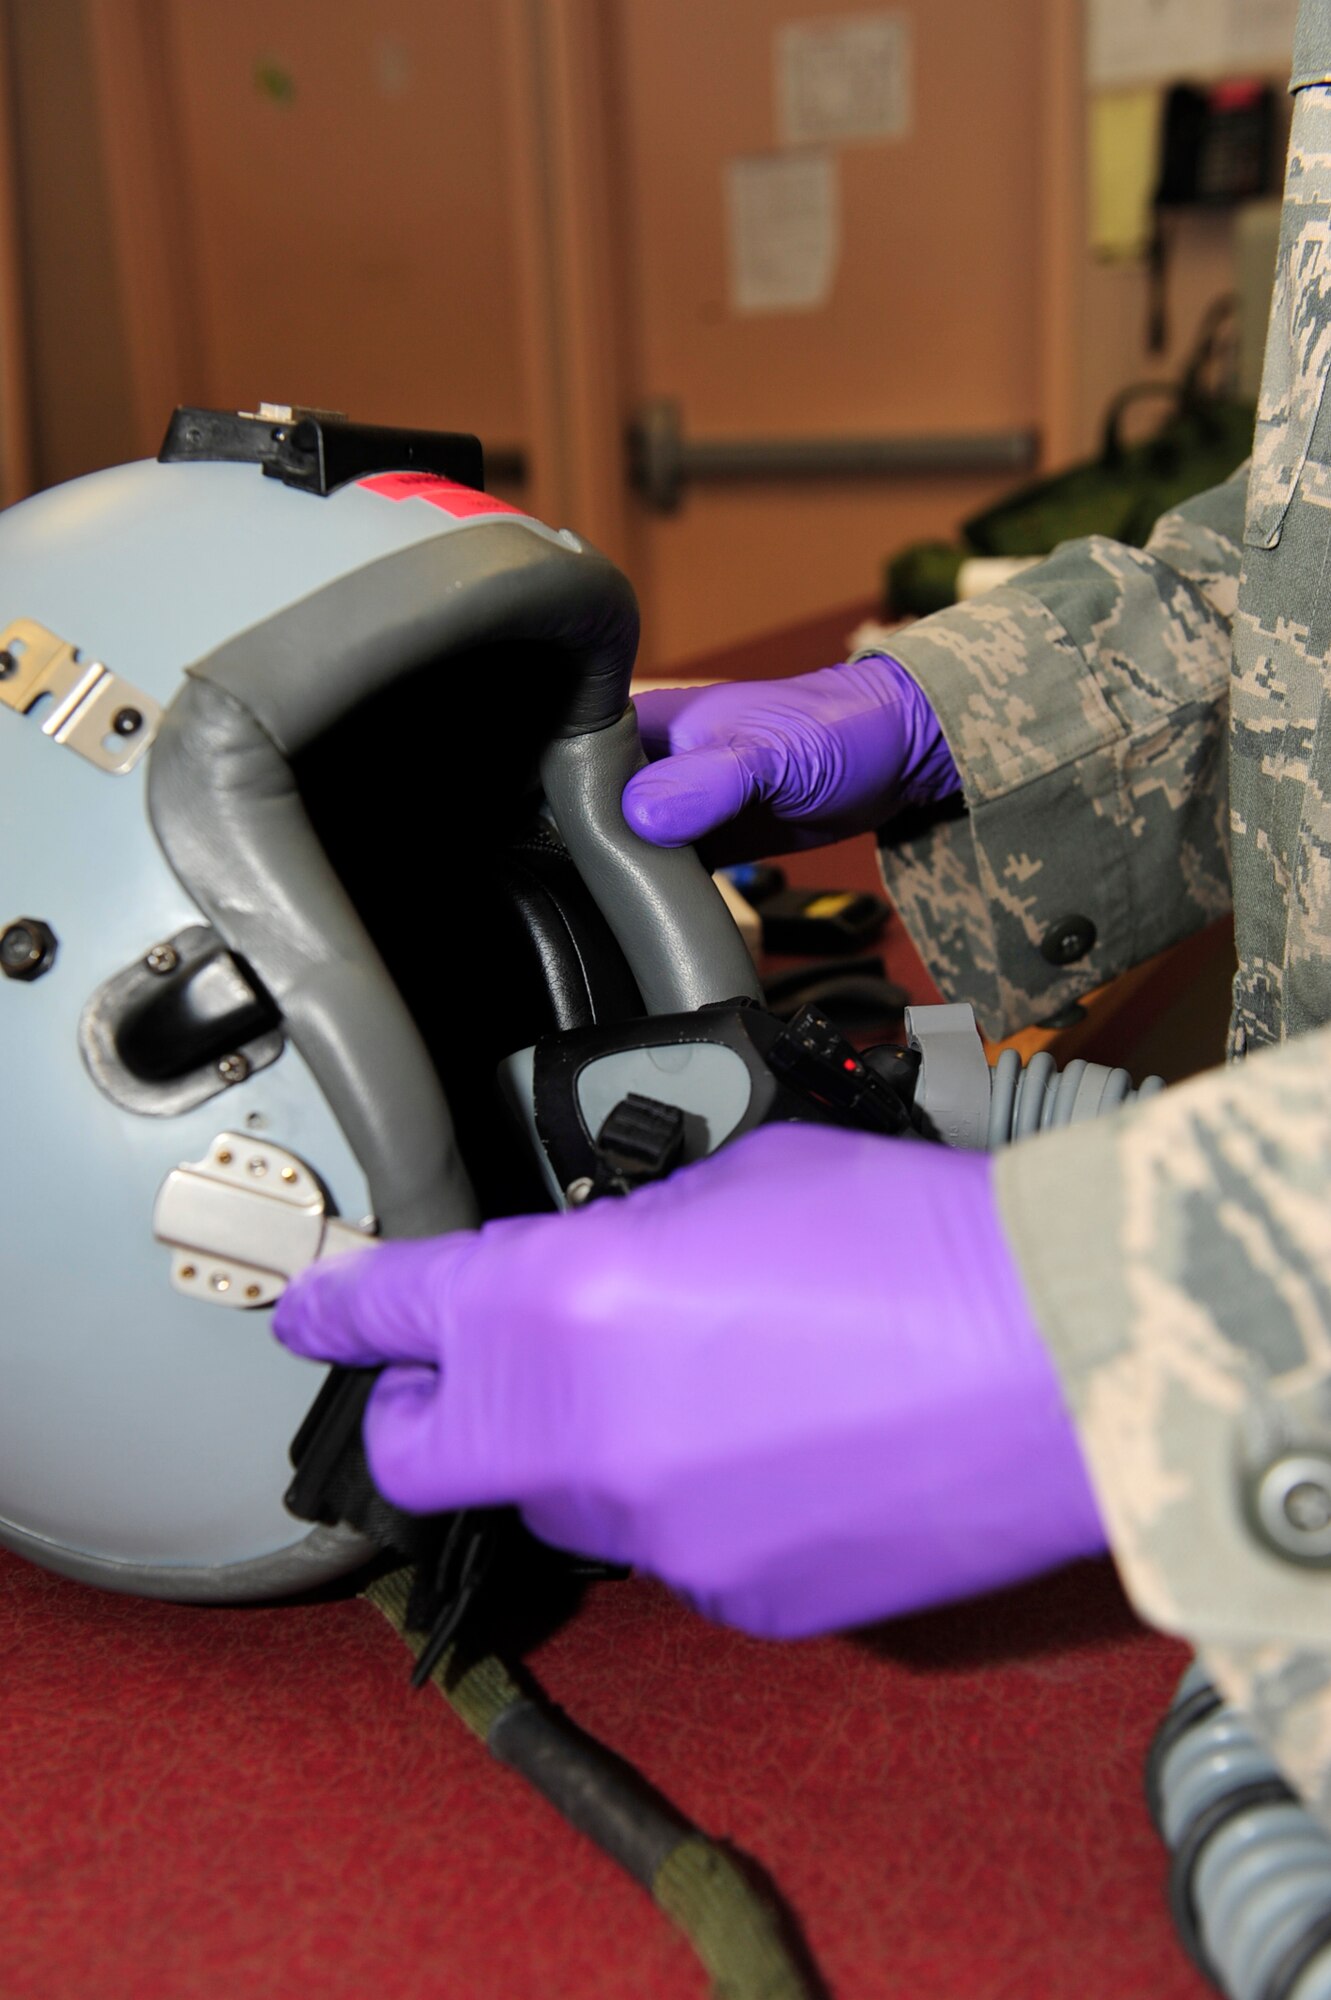 United States Air Force Staff Sgt. Nathan Davis, an aircrew flight equipment technician with the 18th Operations Support Squadron, Kadena Air Force Base, Japan, conducts a periodic inspection on an HGU-55P helmet during the Northern Edge Premier Joint Training Exercise, at Eielson Air Force Base, Alaska, June 21. More than 1,000 personnel have been deployed to Alaska for the exercise, which is taking place at the northern most Alaskan Army and Air Force installations.  (U.S. Air Force photo/Staff Sgt. Lakisha A. Croley)